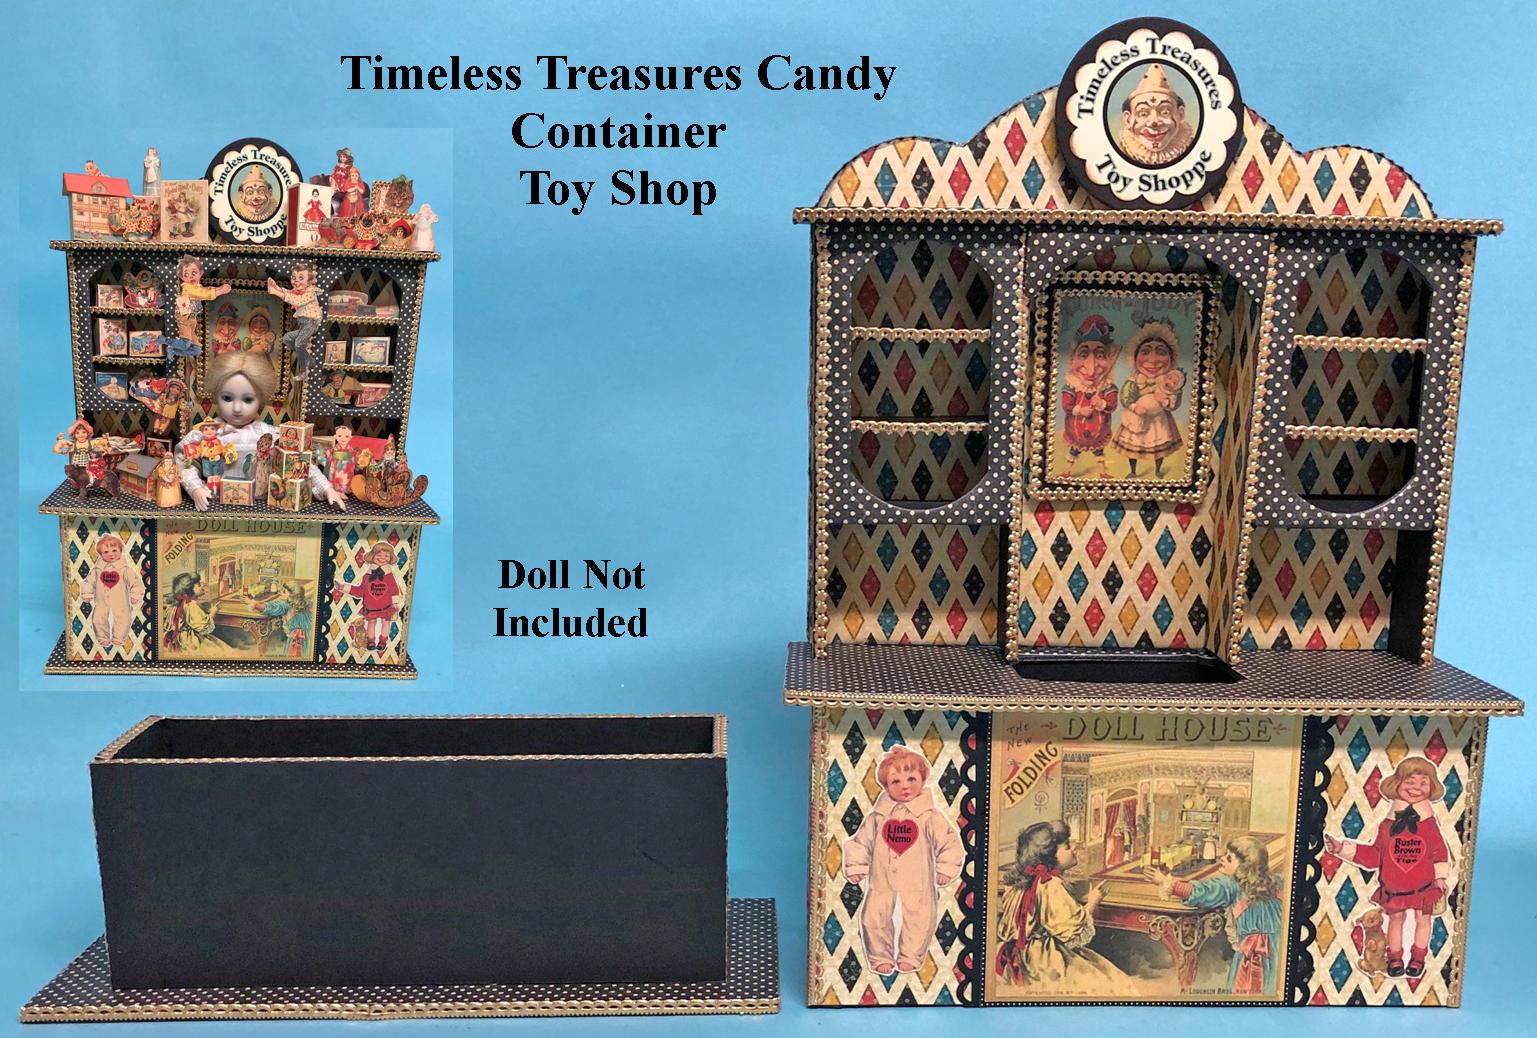 Timeless Treasures Toy Shop Candy Container   •   Thursday, August 4th, 9:00 am